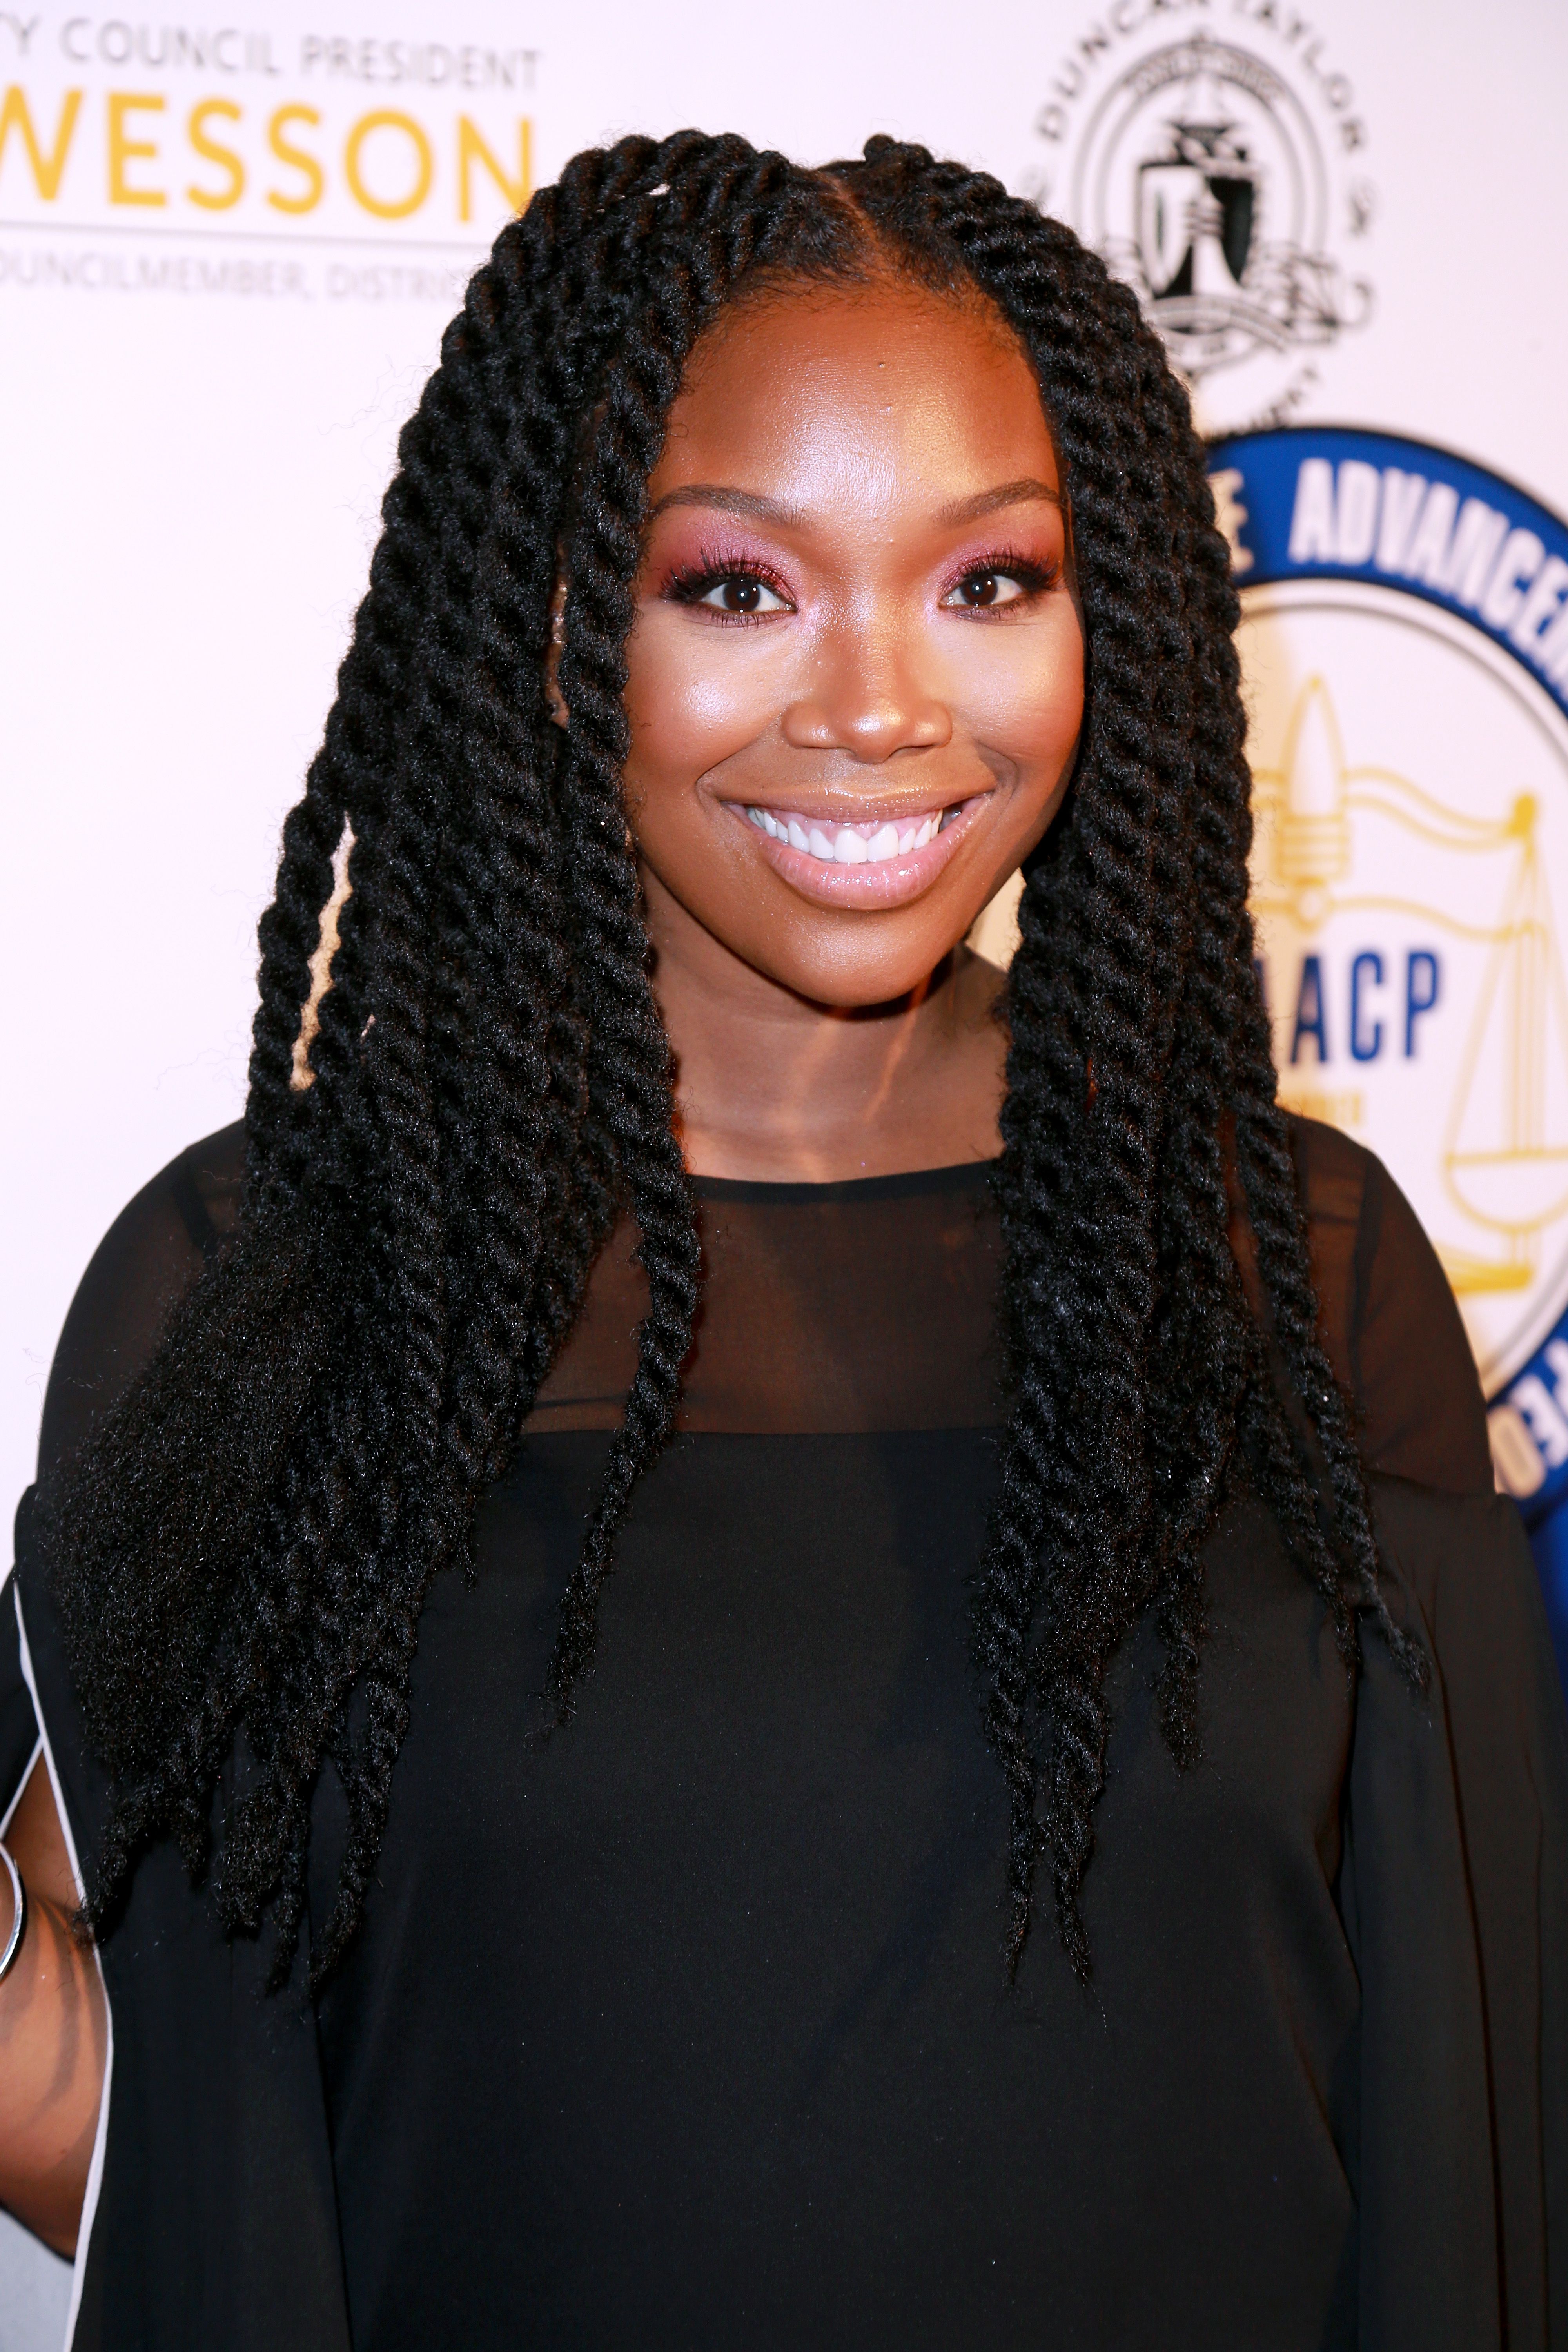 Brandy Norwood during the 27th Annual NAACP Theatre Awards at Millennium Biltmore Hotel on February 26, 2018 in Los Angeles, California. | Source: Getty Images